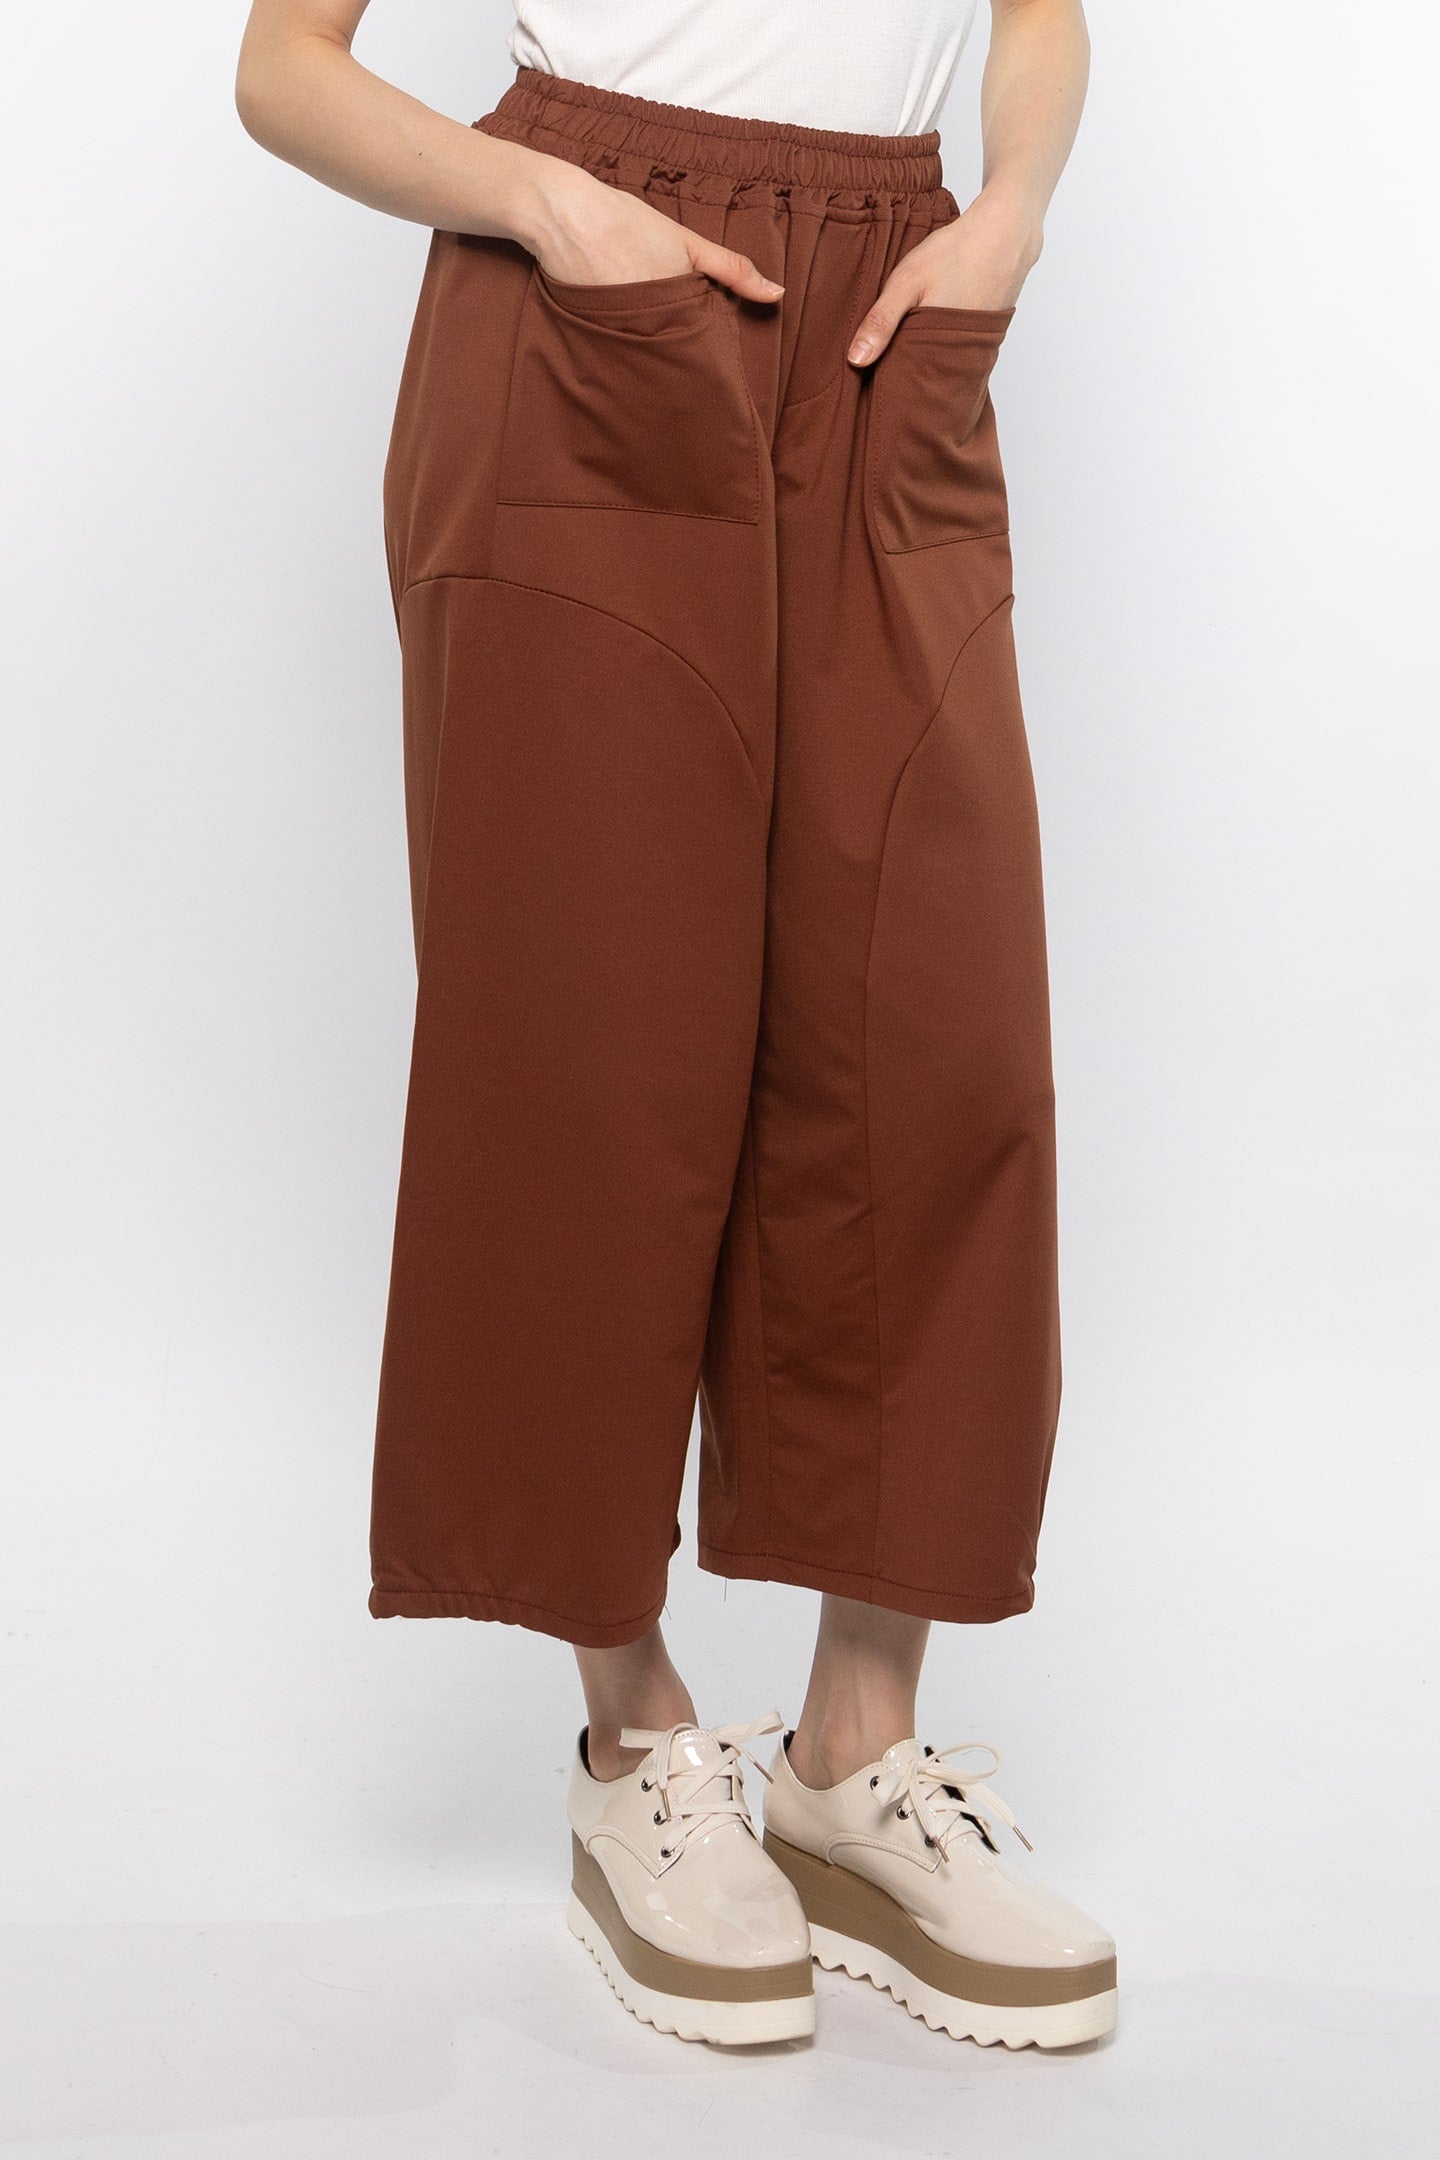 Bei Culottes Pants in Rust